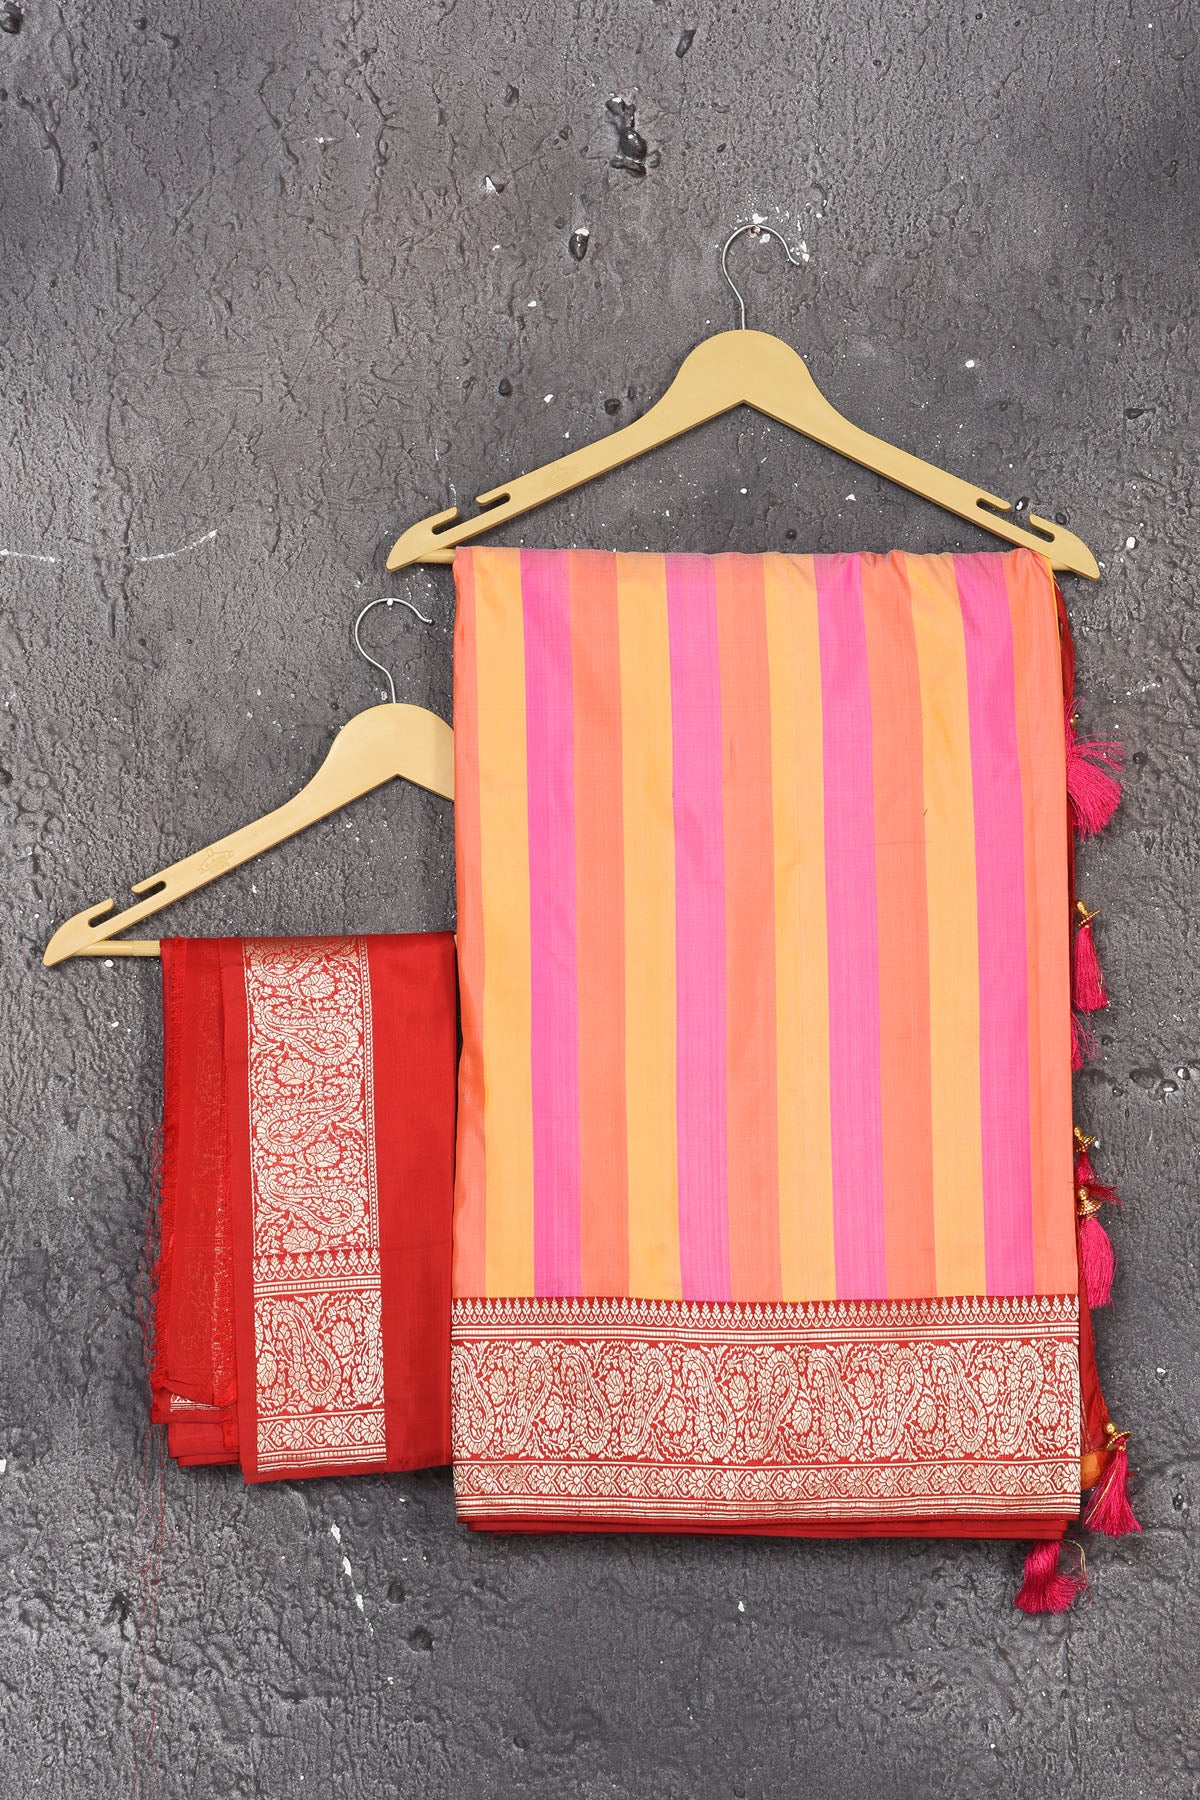 Buy this classy red banarasi silk brocade woven diagonal stripes and floral saree online in USA which has beautiful zari work all over the heavy border and end with handmade latkan. Pair this royal banarasi handloom brocade woven saree with your designer blouse and a potli bag from Pure Elegance Indian fashion store in USA.- Unstitched blouse.